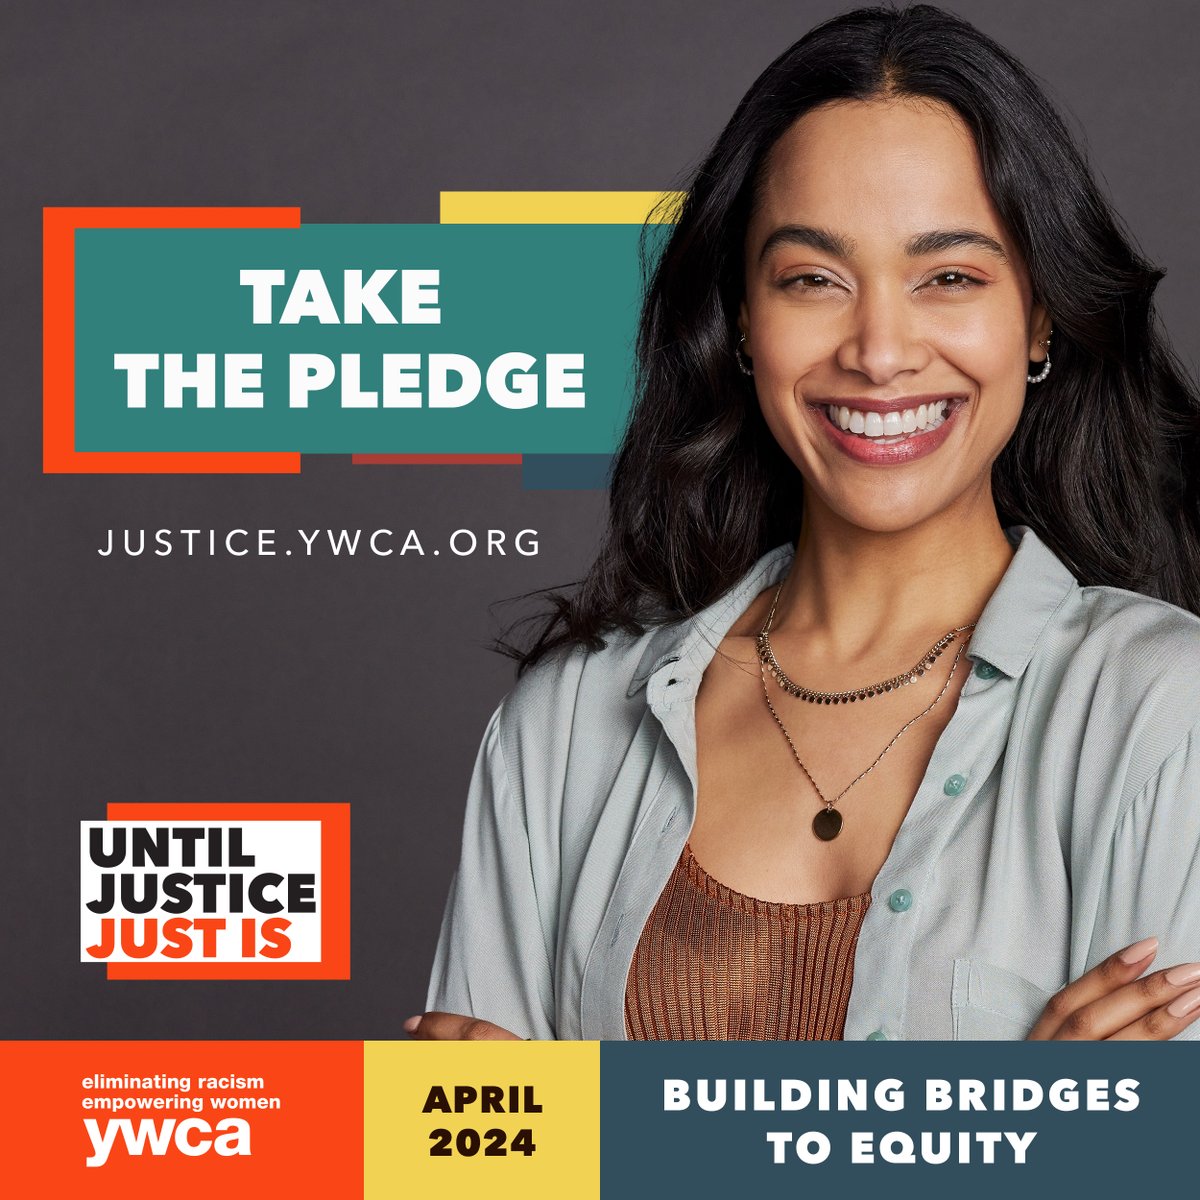 Take action against systemic racism right now by downloading the #YWCARacialJusticeChallenge app at justice.ywca.org. Join us — all of us — in dismantling systemic racism… #UntilJusticeJustIs #UJJI @YWCAUSA